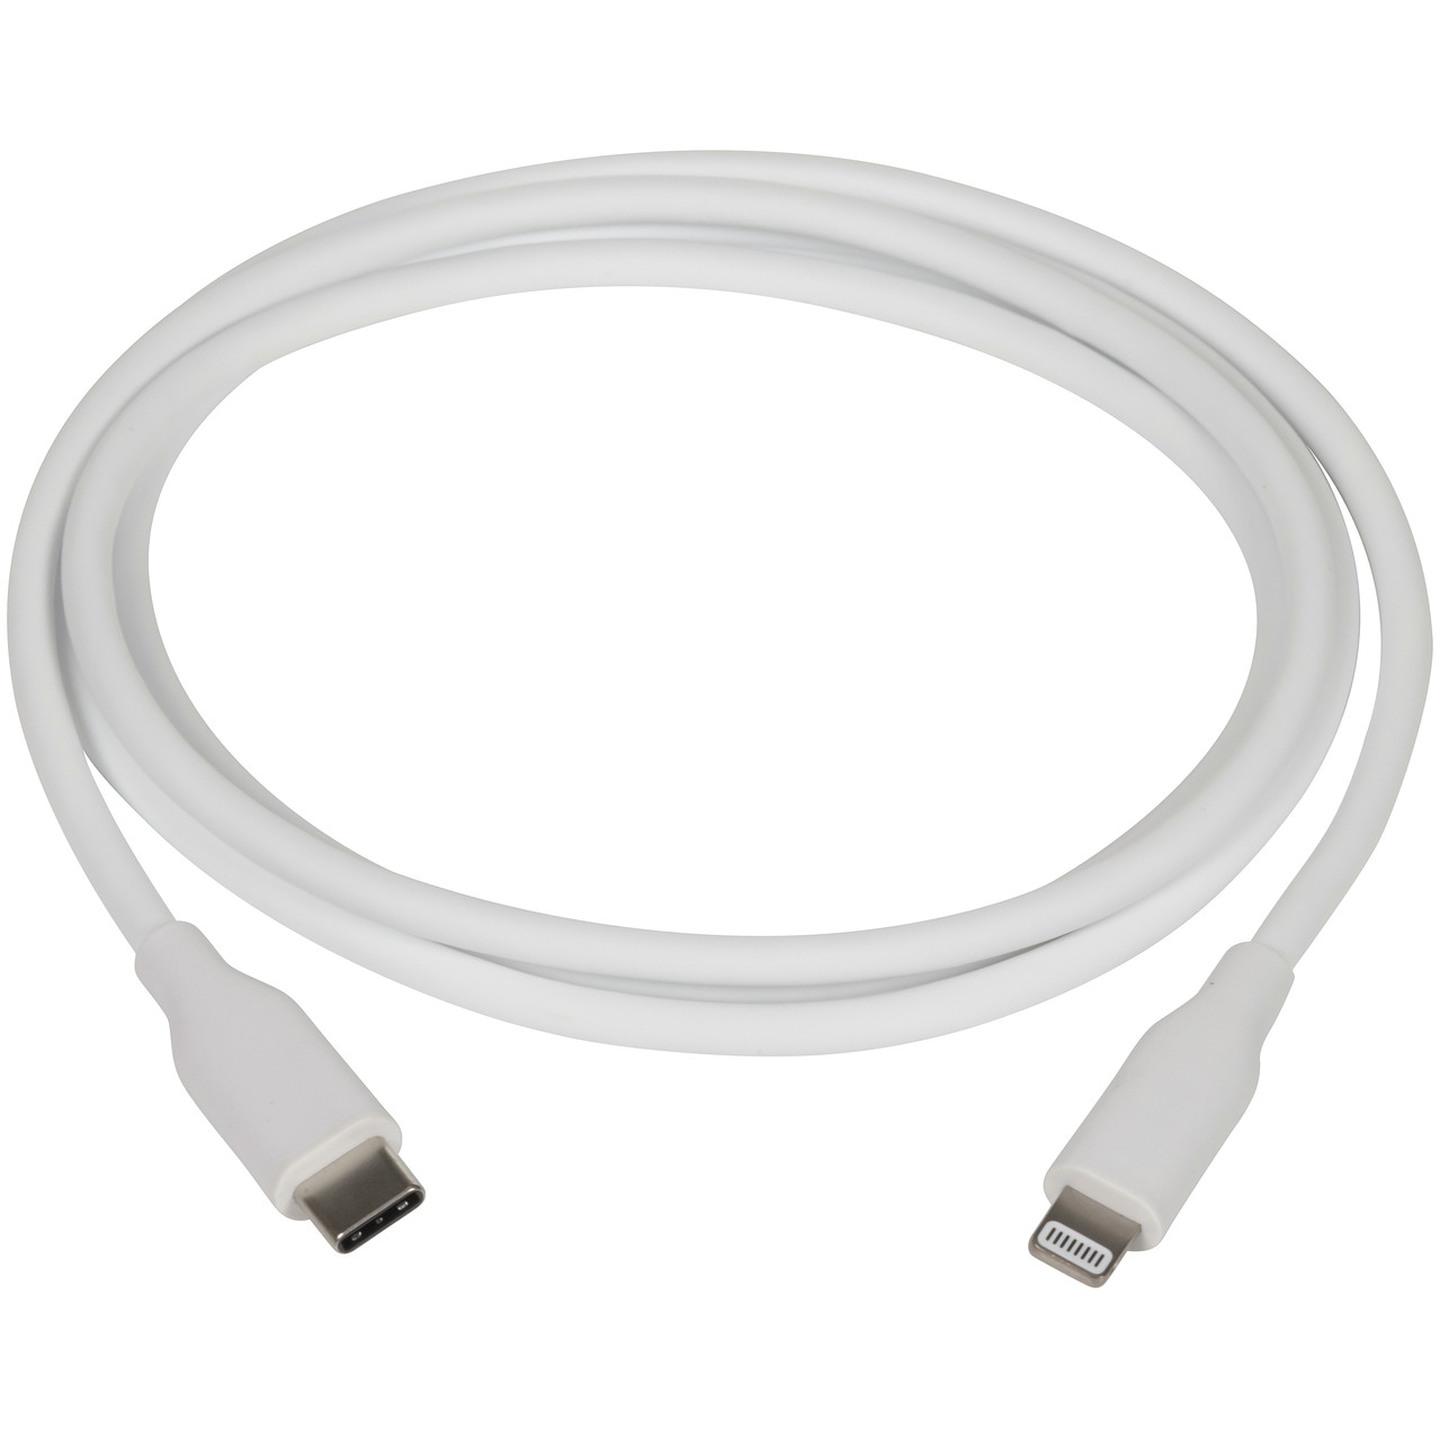 1.2m White Silicone USB Type-C to Lightning MFi Cable